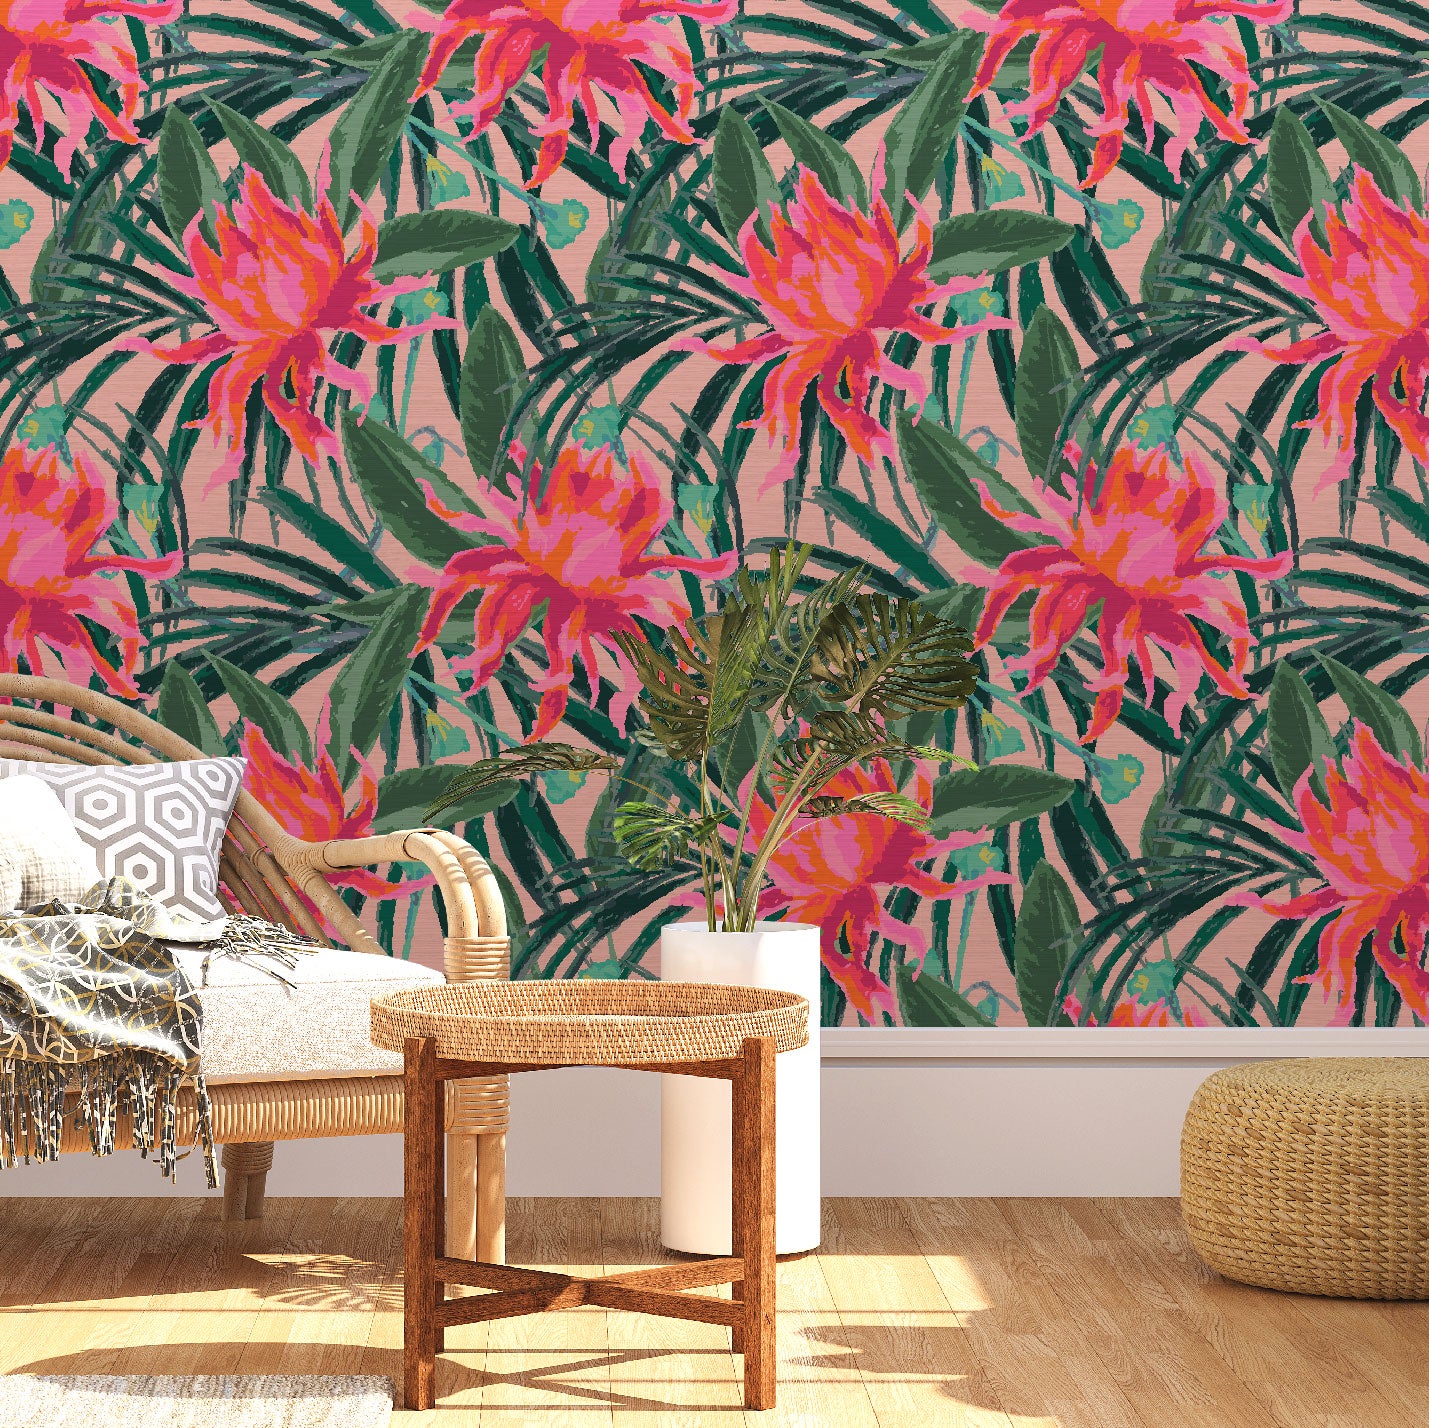 Load image into Gallery viewer, Living room with grasscloth wallpaper with light pink based featuring oversized painterly tropical flowers and palm leafs in striking shades of pink and leafs in shades of deep green
